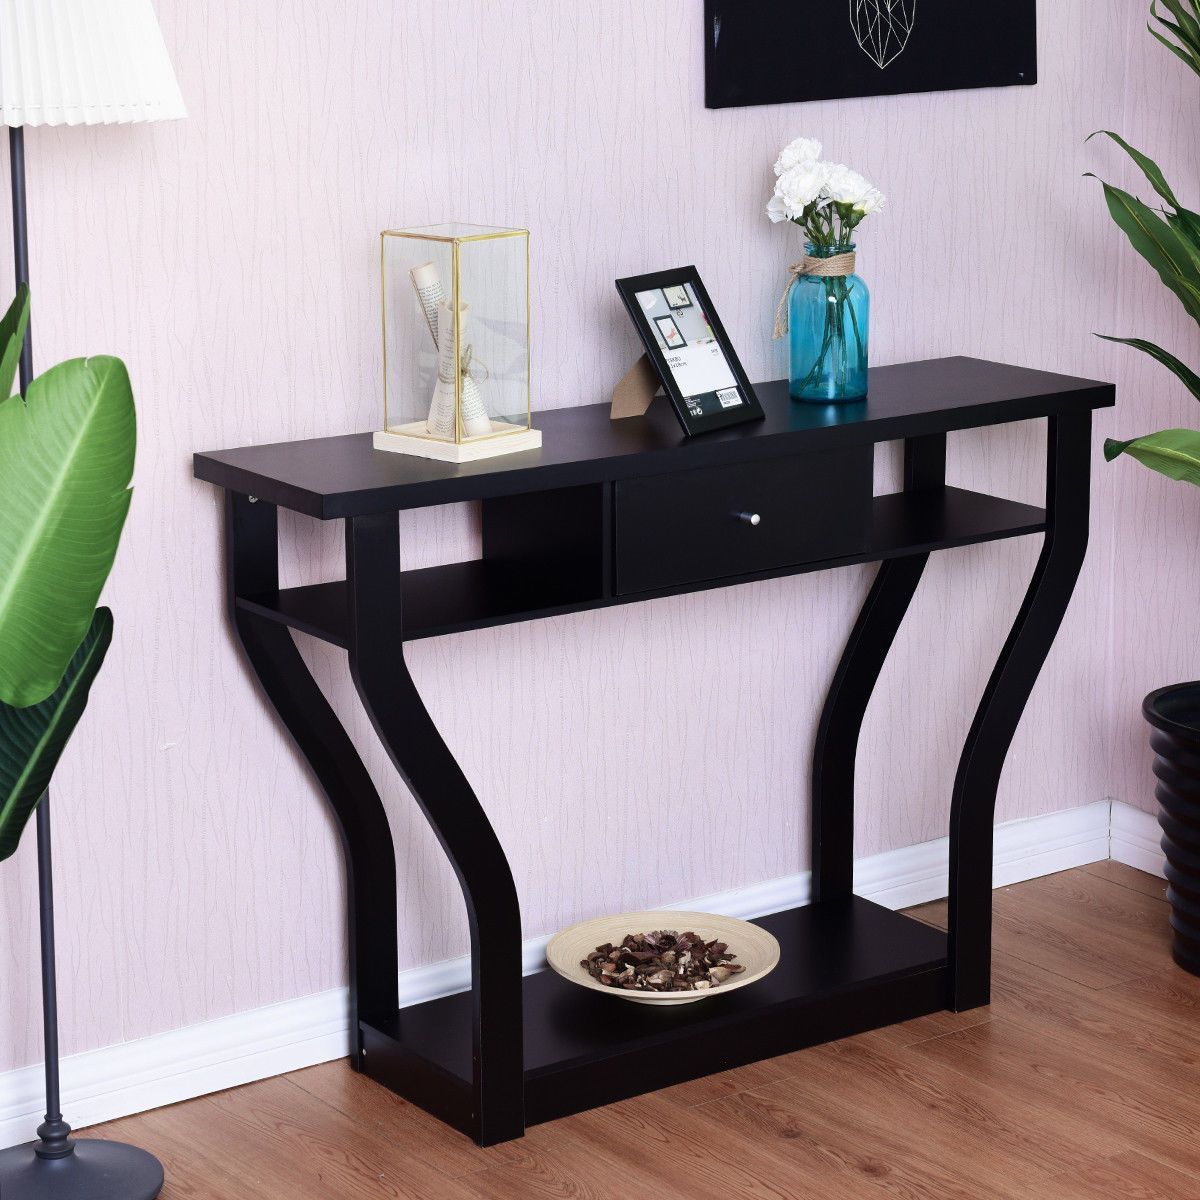 Modern Entryway Accent Console Table Pertaining To Modern Console Tables (View 13 of 20)